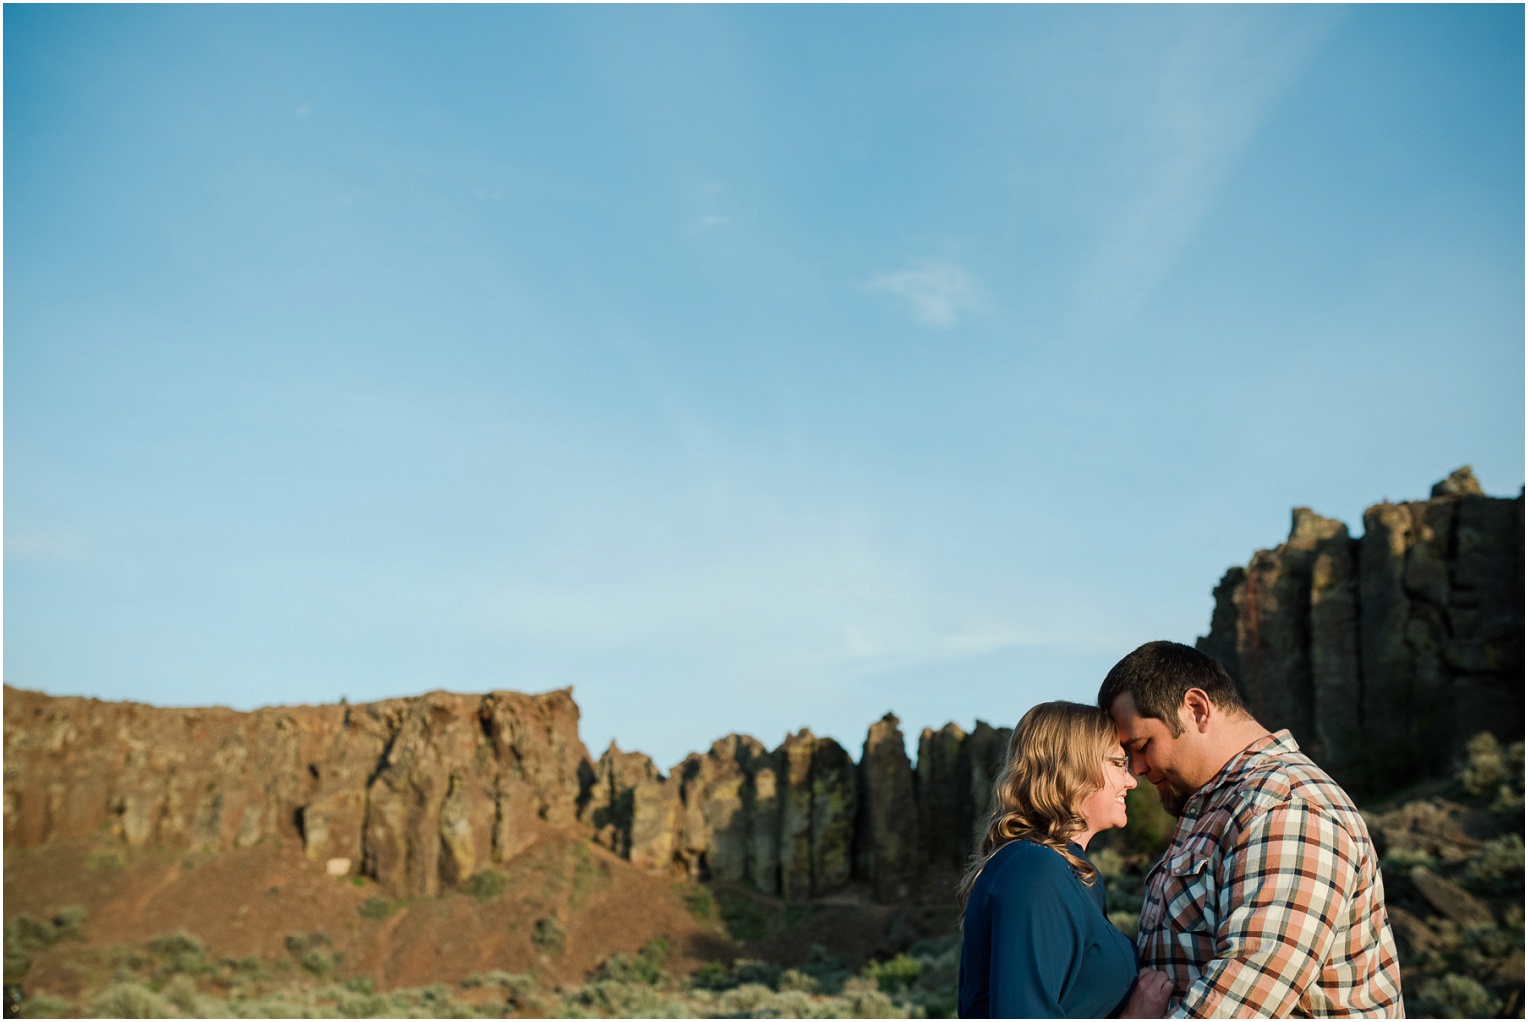 Vantage Crags Engagement Session Couple standing in front of the Feathers